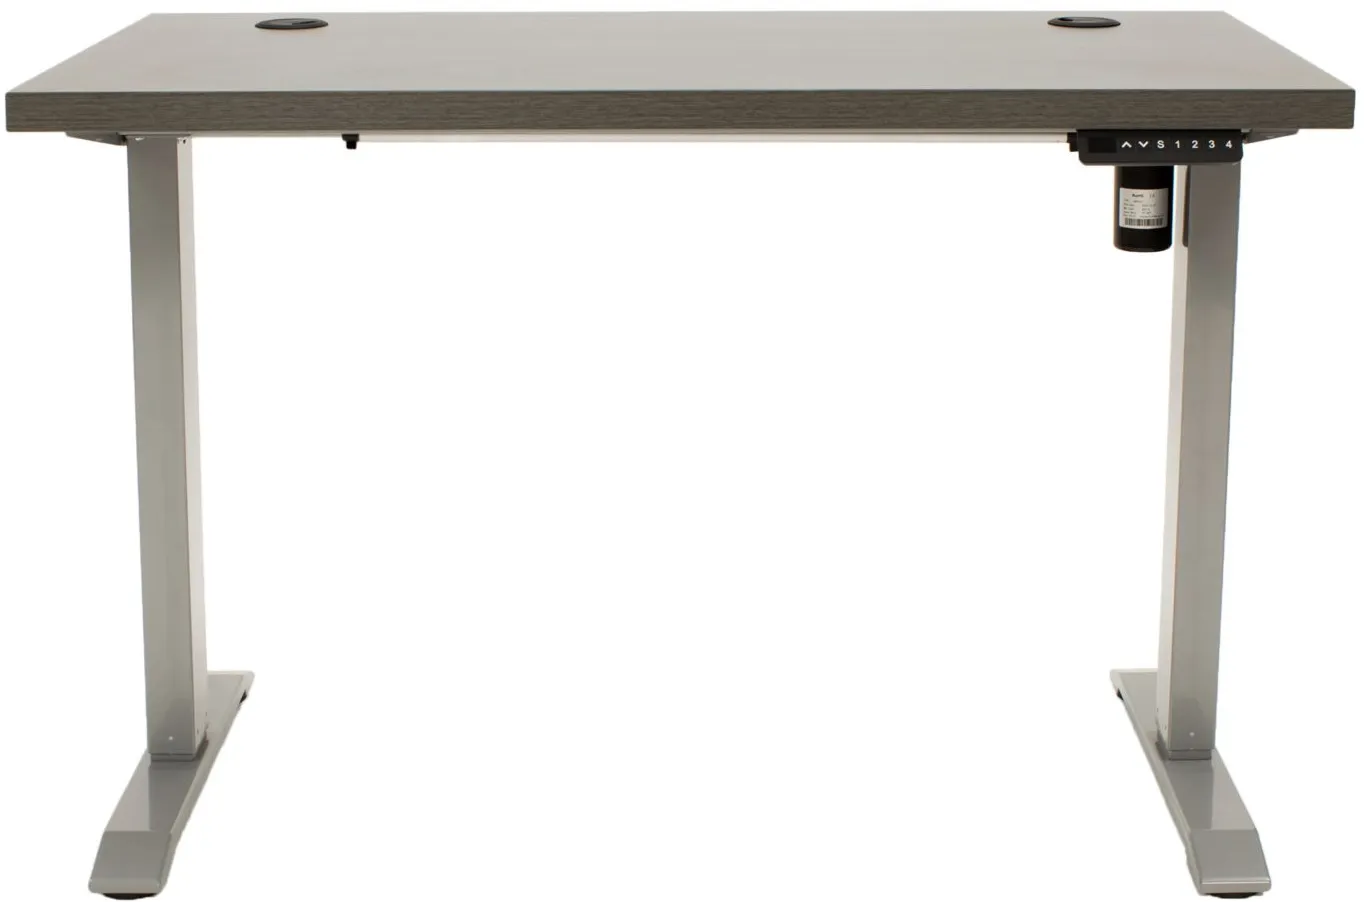 Viviana Adjustable-Height Standing Computer Desk in Gray by Martin Furniture